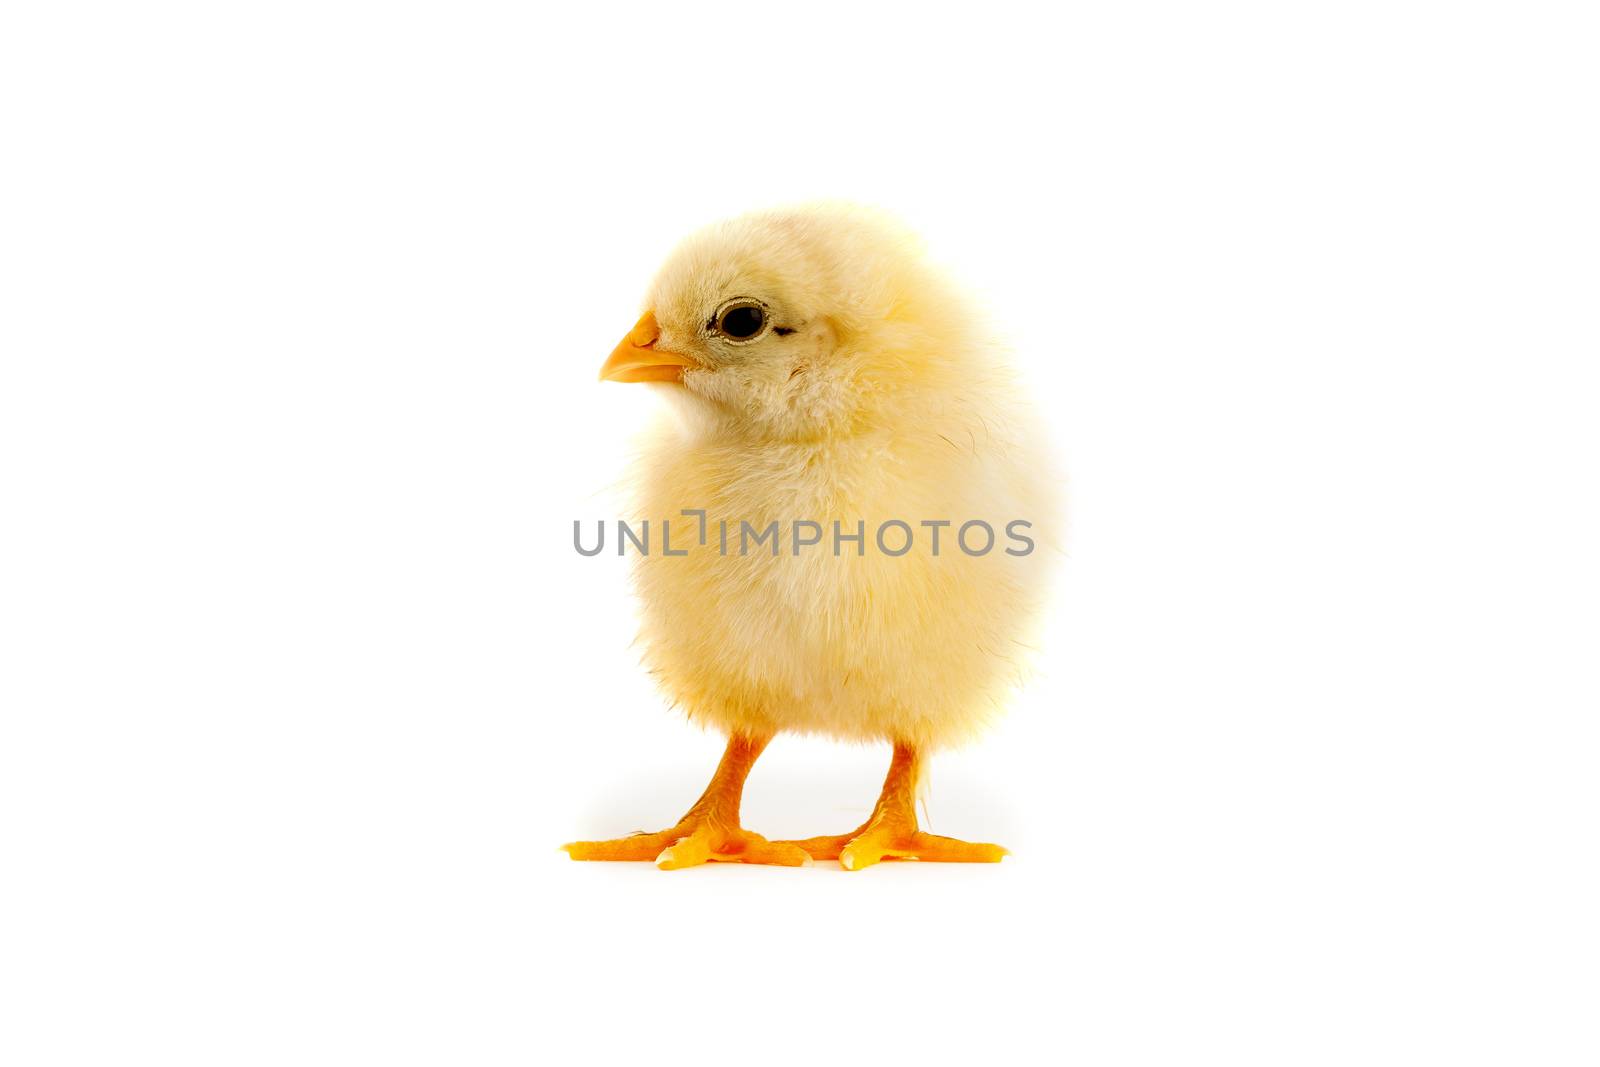 The yellow chick on a white background by bloodua